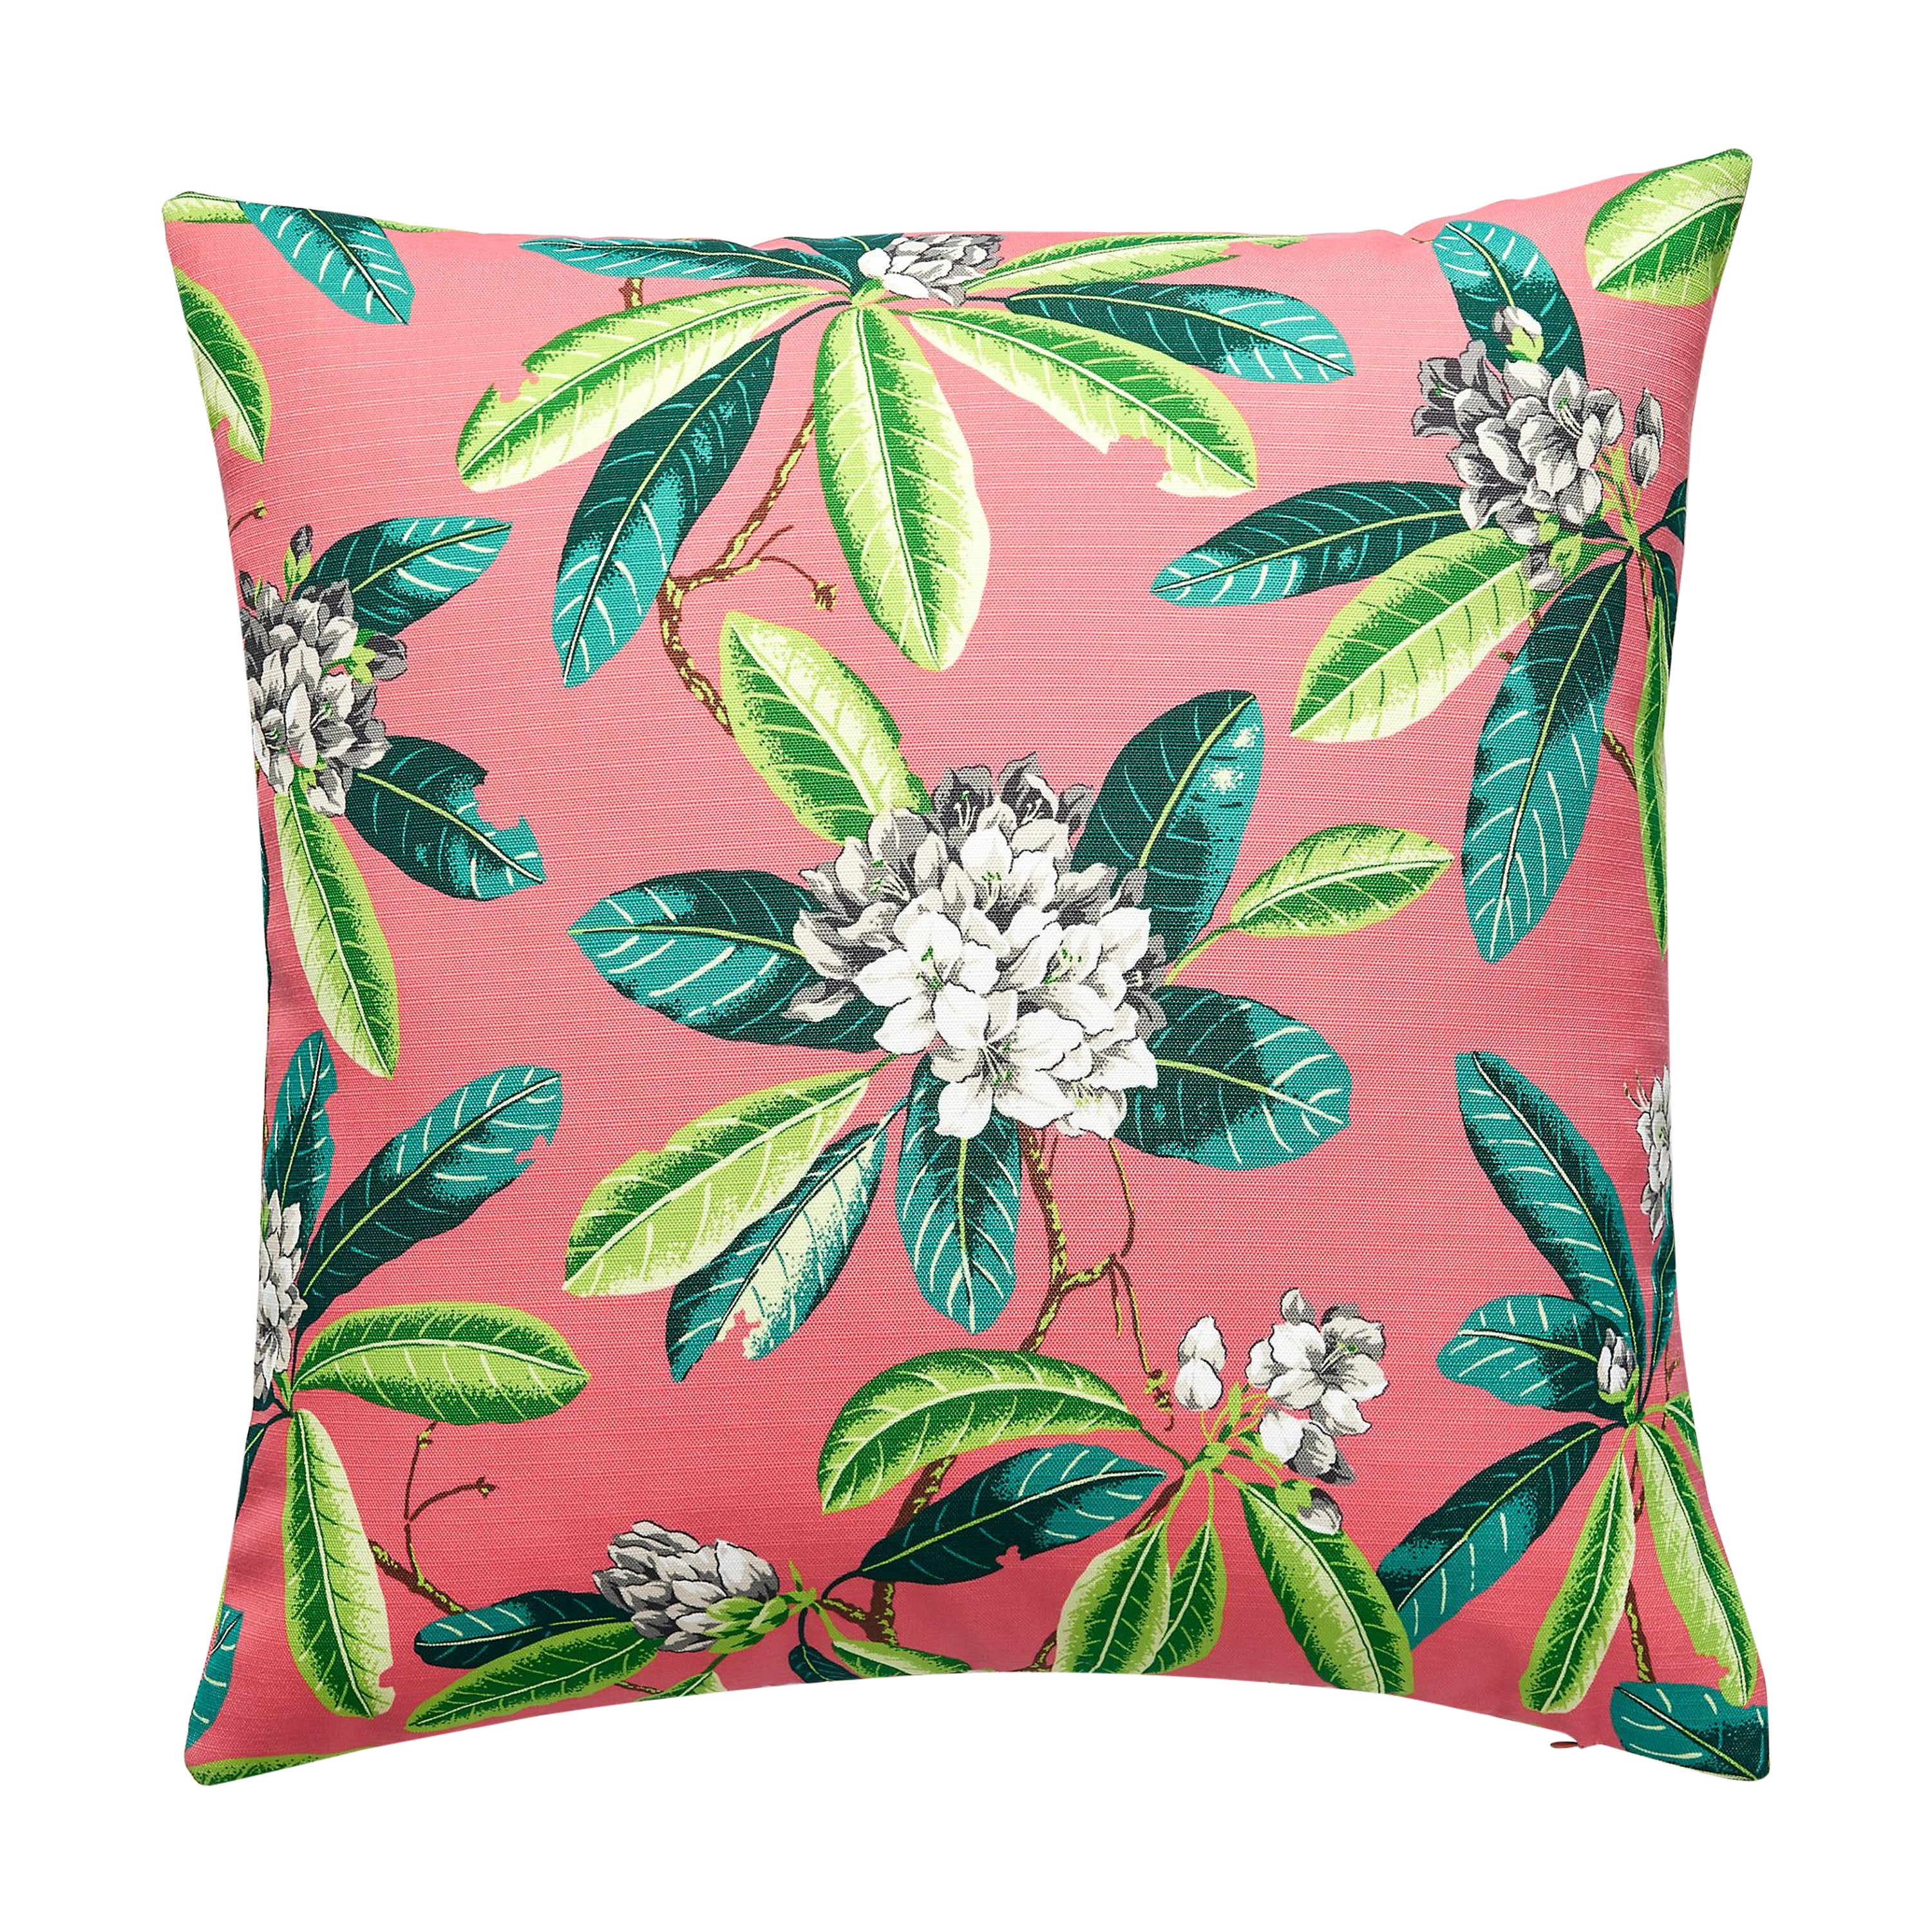 Rhododendron Outdoor Pillow